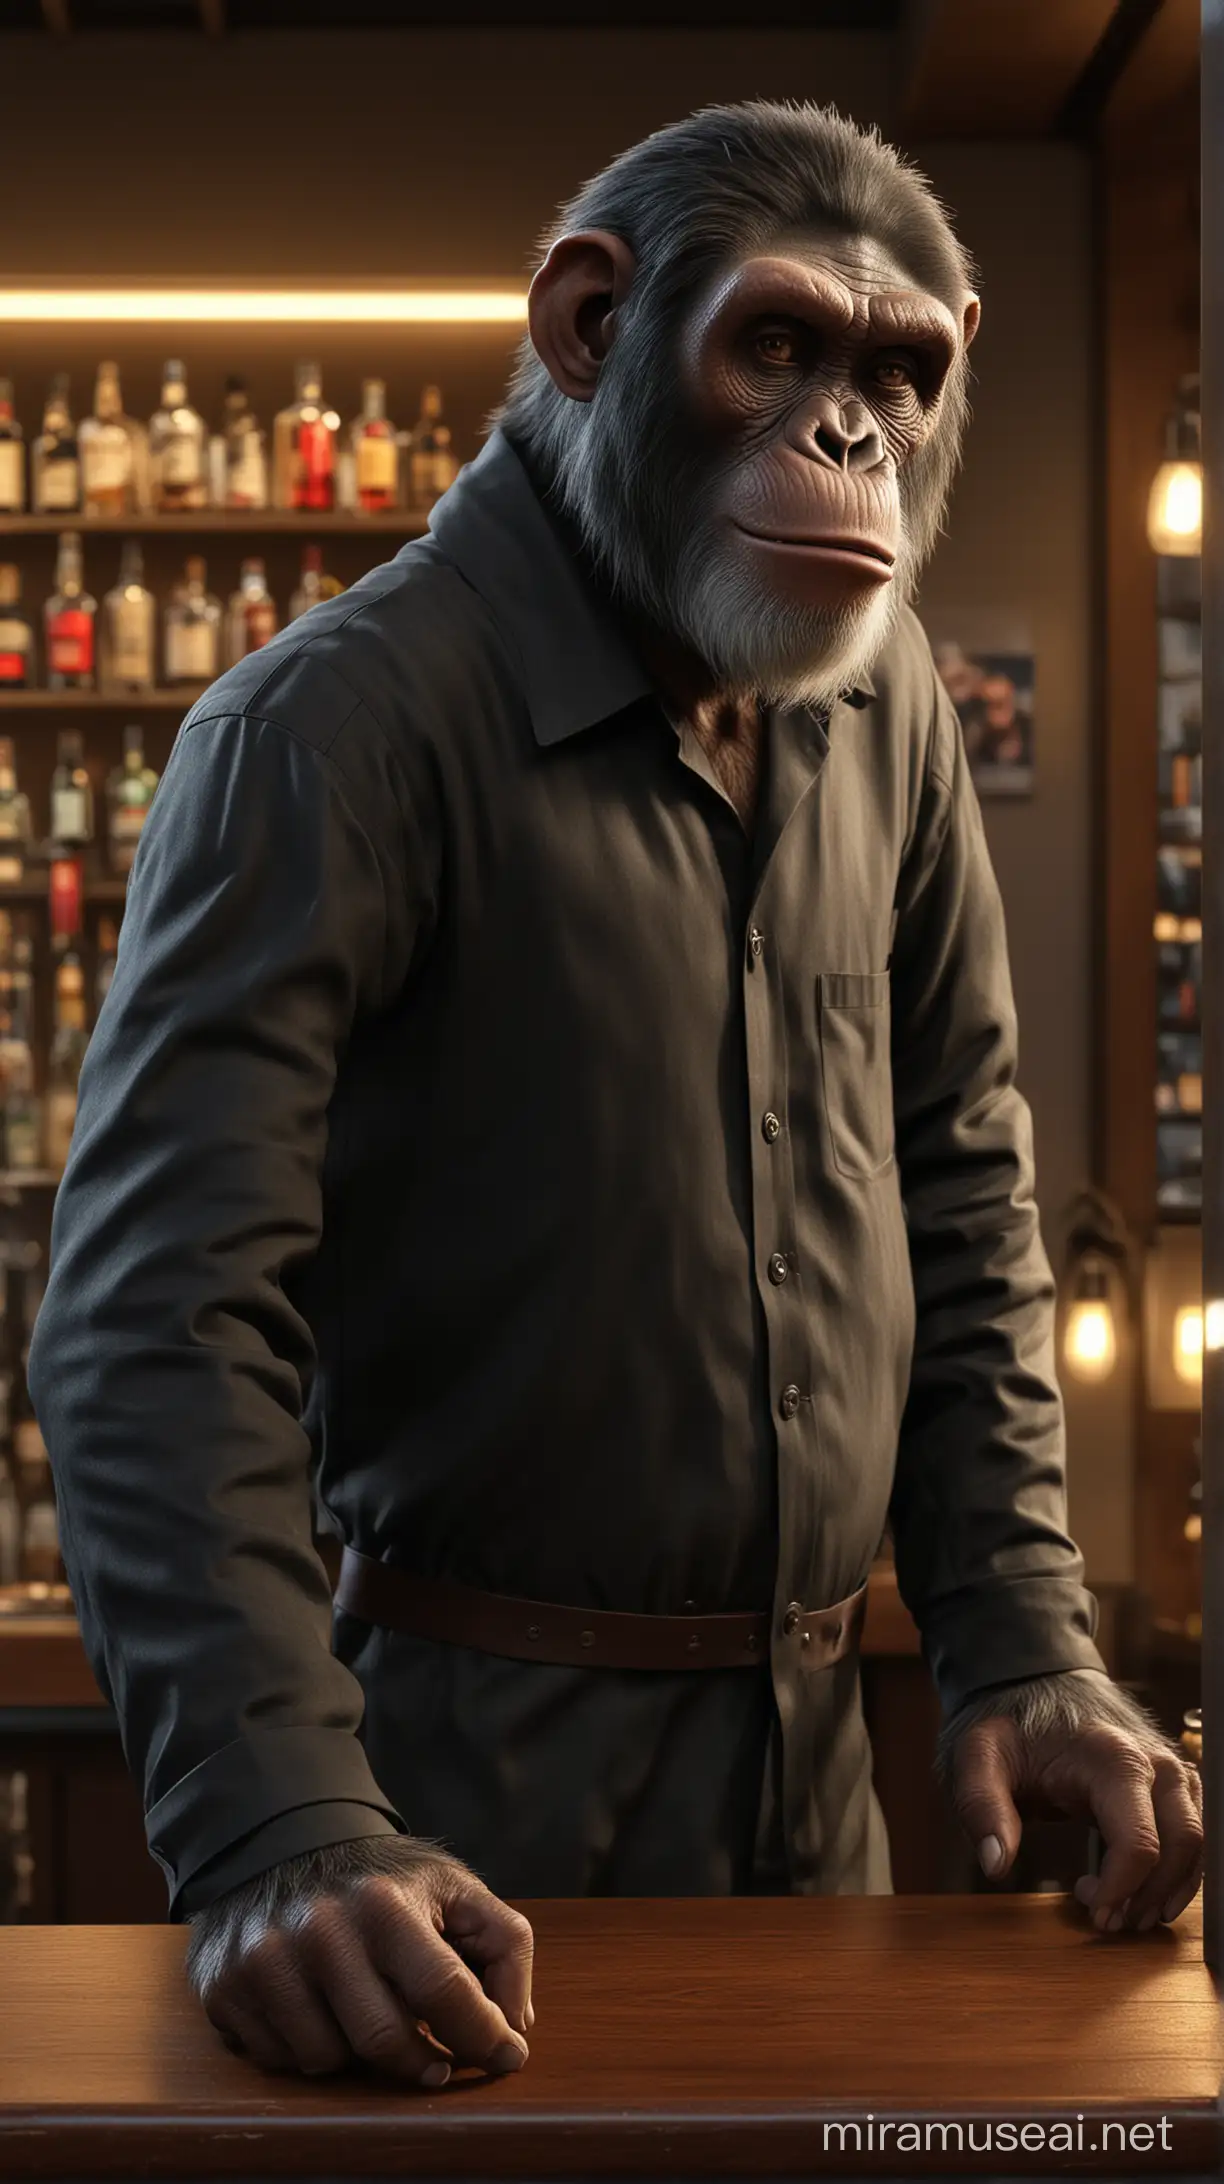 Realistic Modern Bar Keeper Ape in Human Pose with Illuminated Backdrop